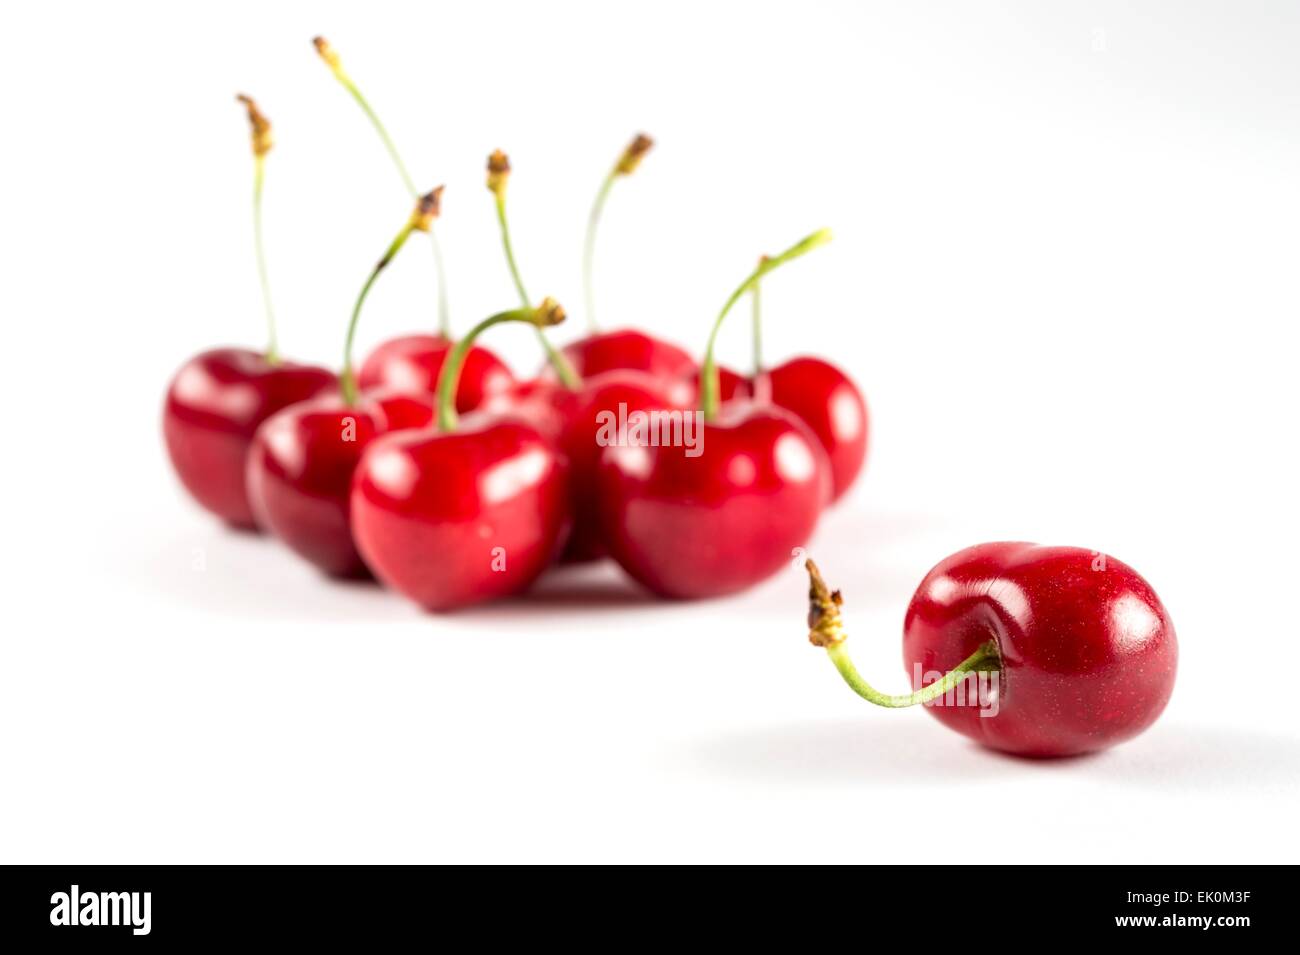 nobody, no one, no-one, healthy eating, fresh, food, food and drink, produce, fruit, studio shot, studio shots, still life, plain background, white background, medium group of objects, cherry, cherries, red, focus on foreground Stock Photo